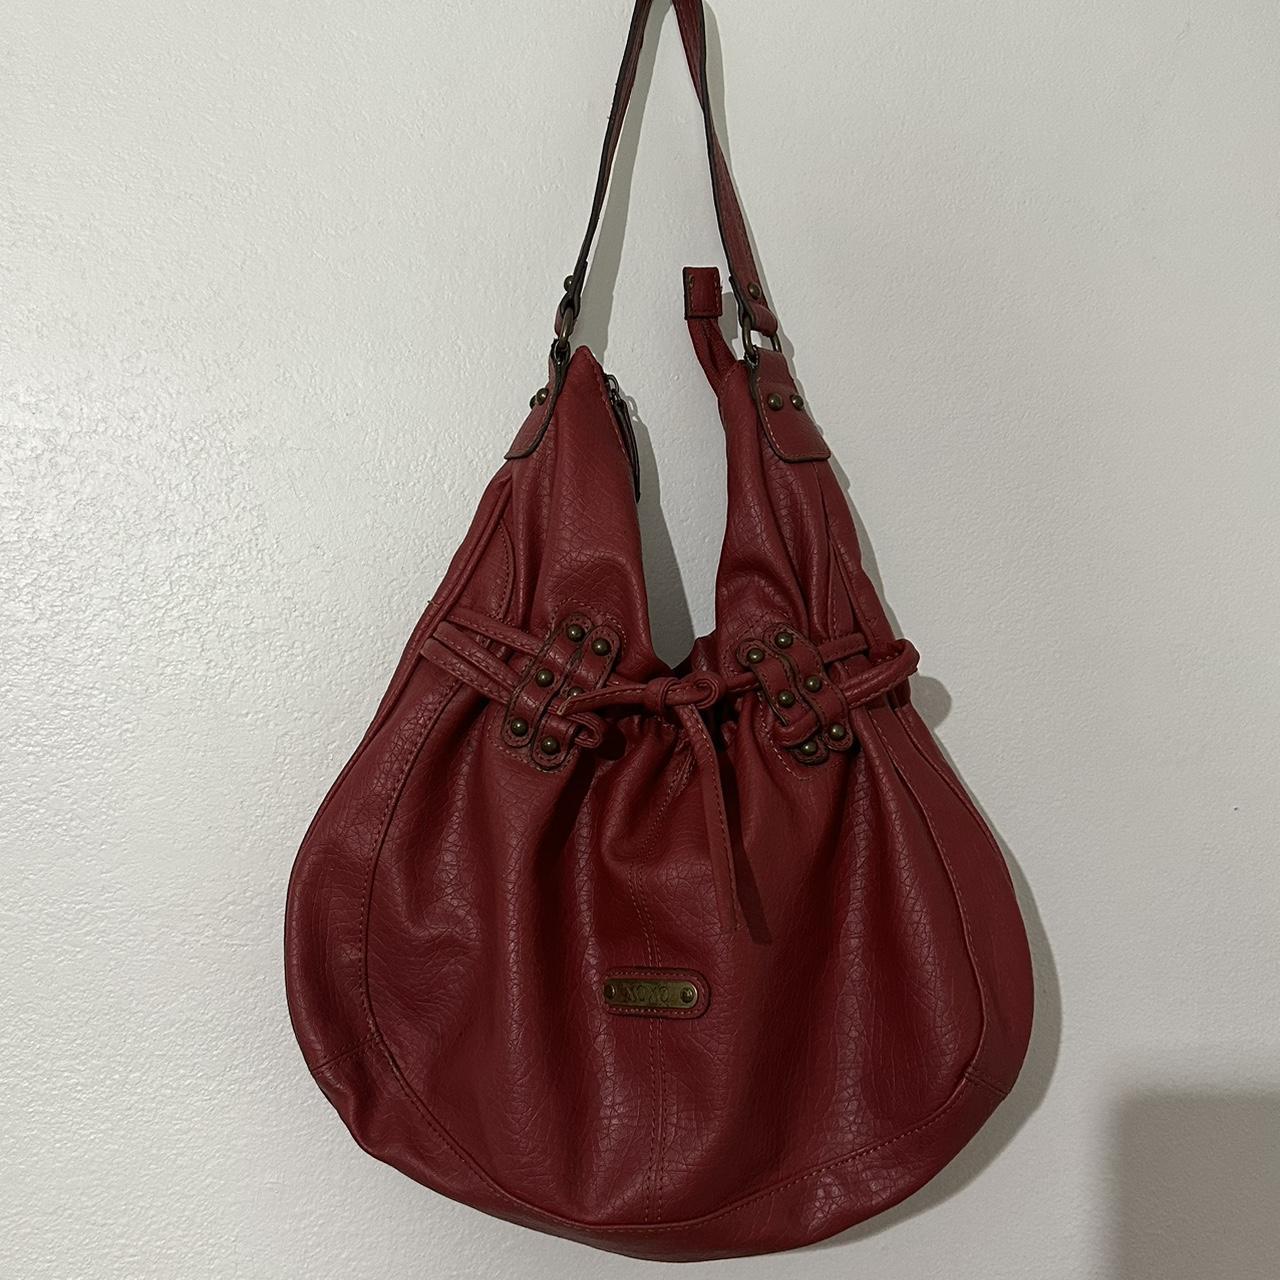 Red Guess Luxe bag, red with gold studs and tassel, - Depop